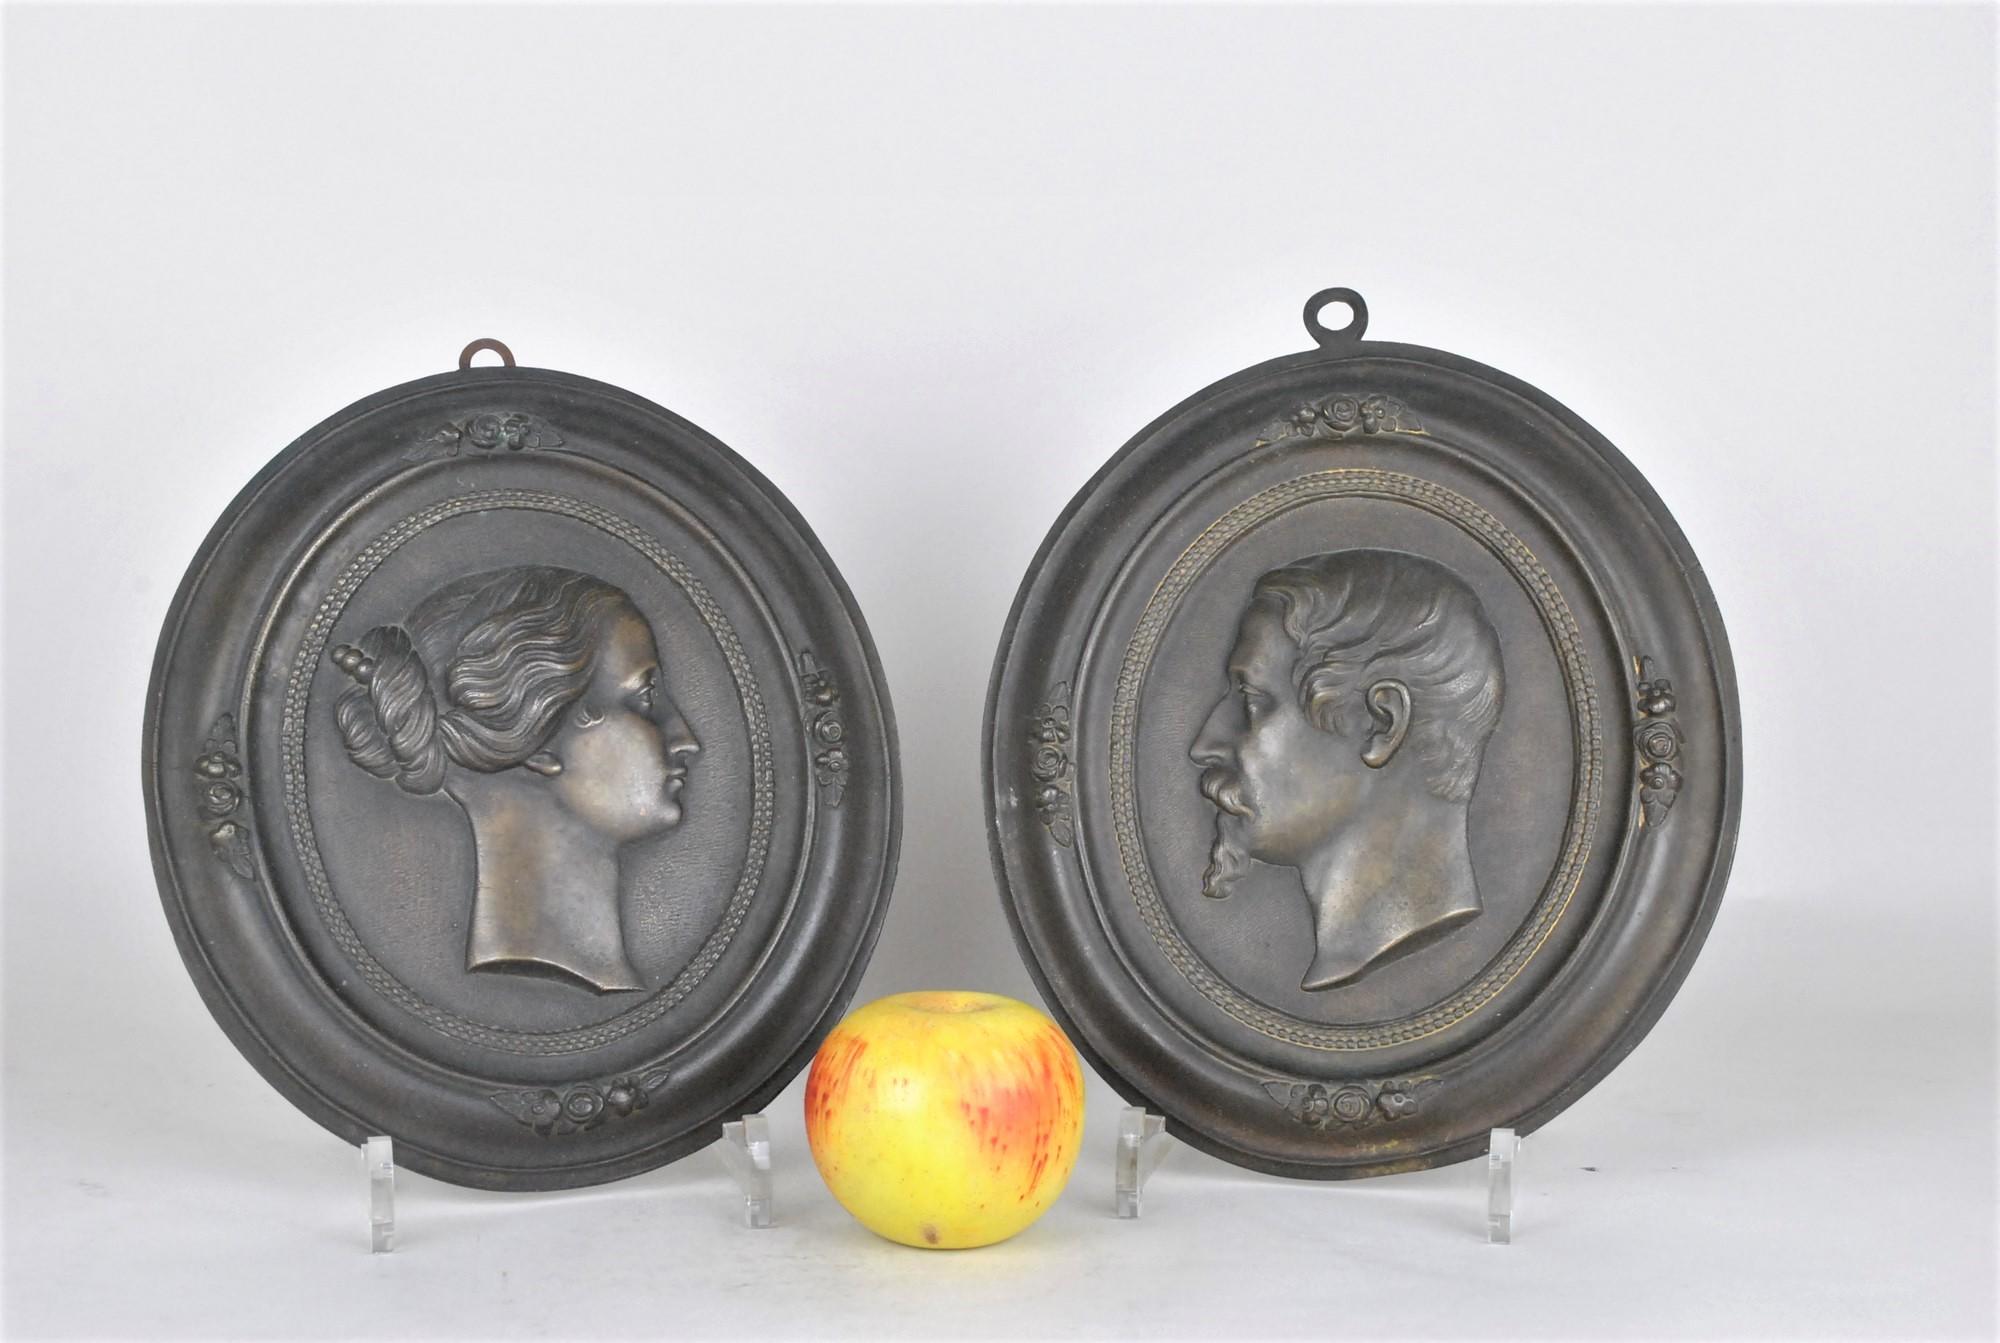 Pair of large oval medallions with the profiles of Napoleon III and Eugenie

Brown patina, low relief

Good general condition, note a deformation at the bottom of the oval of the portrait of Napoleon III

Height 27cm
Length22.5cm.